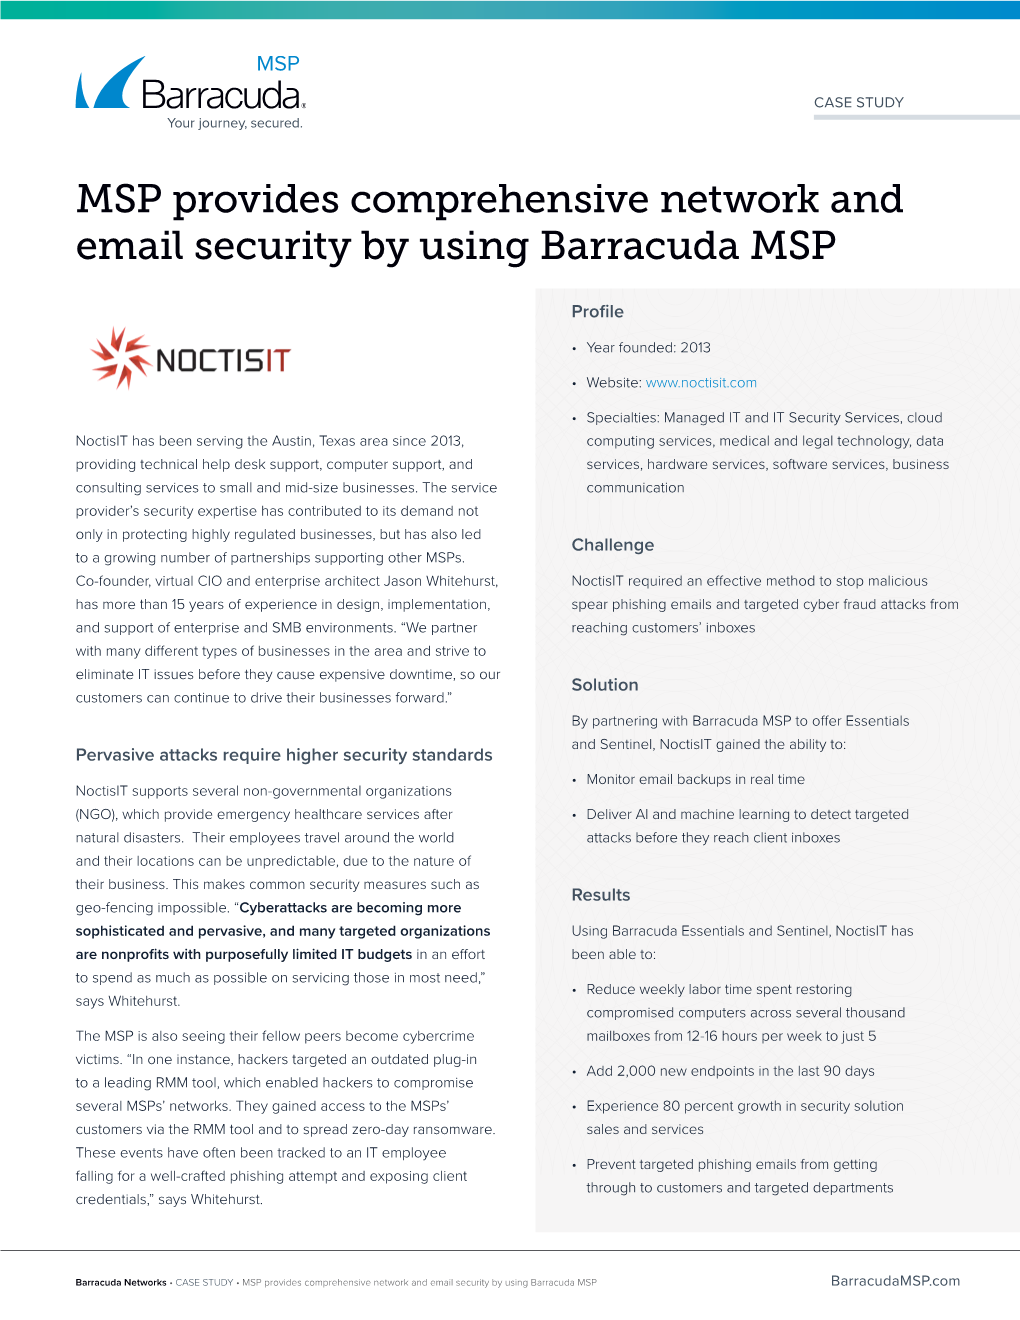 MSP Provides Comprehensive Network and Email Security by Using Barracuda MSP